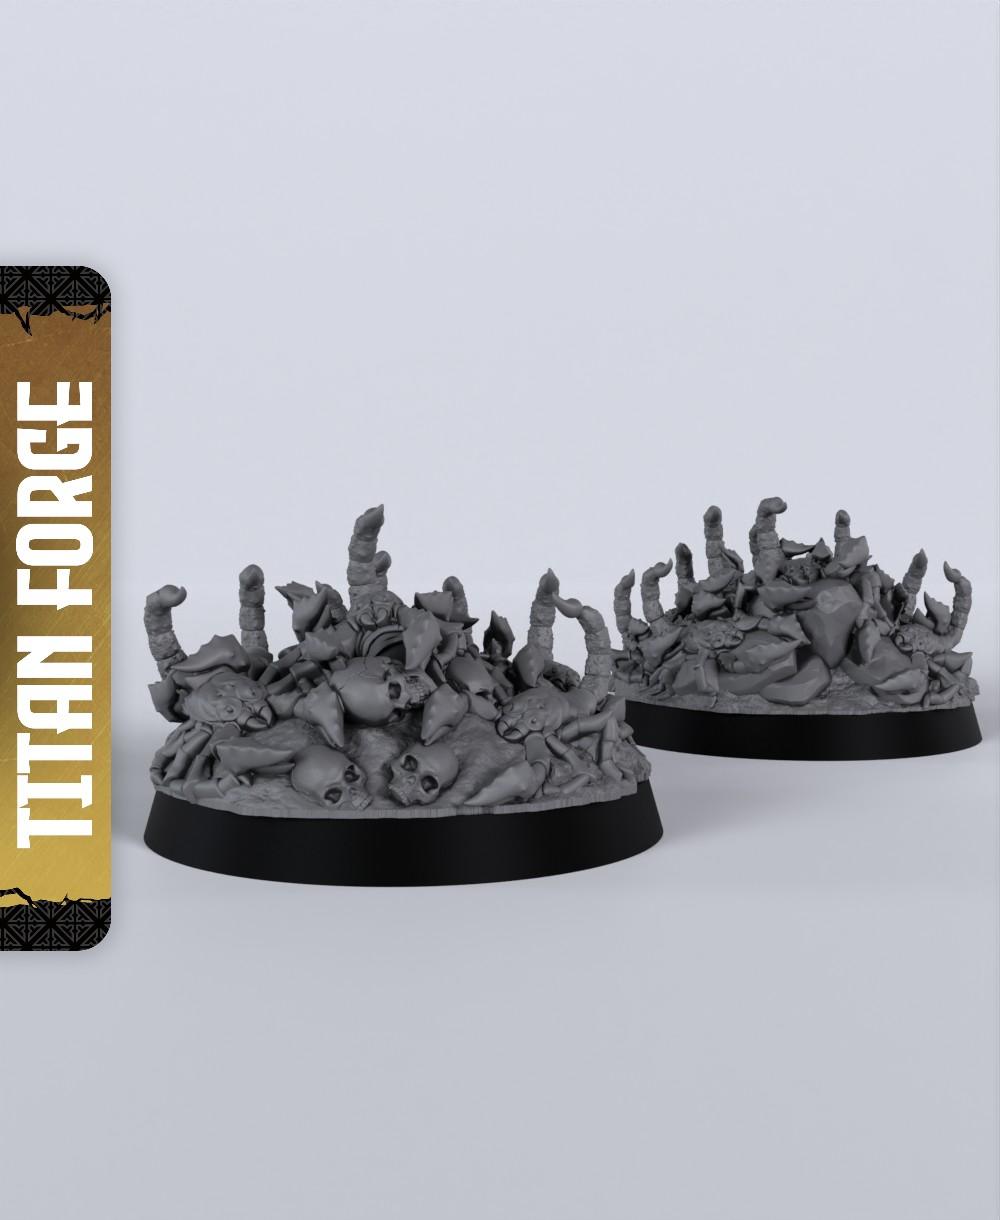 Scorpion Swarm - With Free Dragon Warhammer - 5e DnD Inspired for RPG and Wargamers 3d model